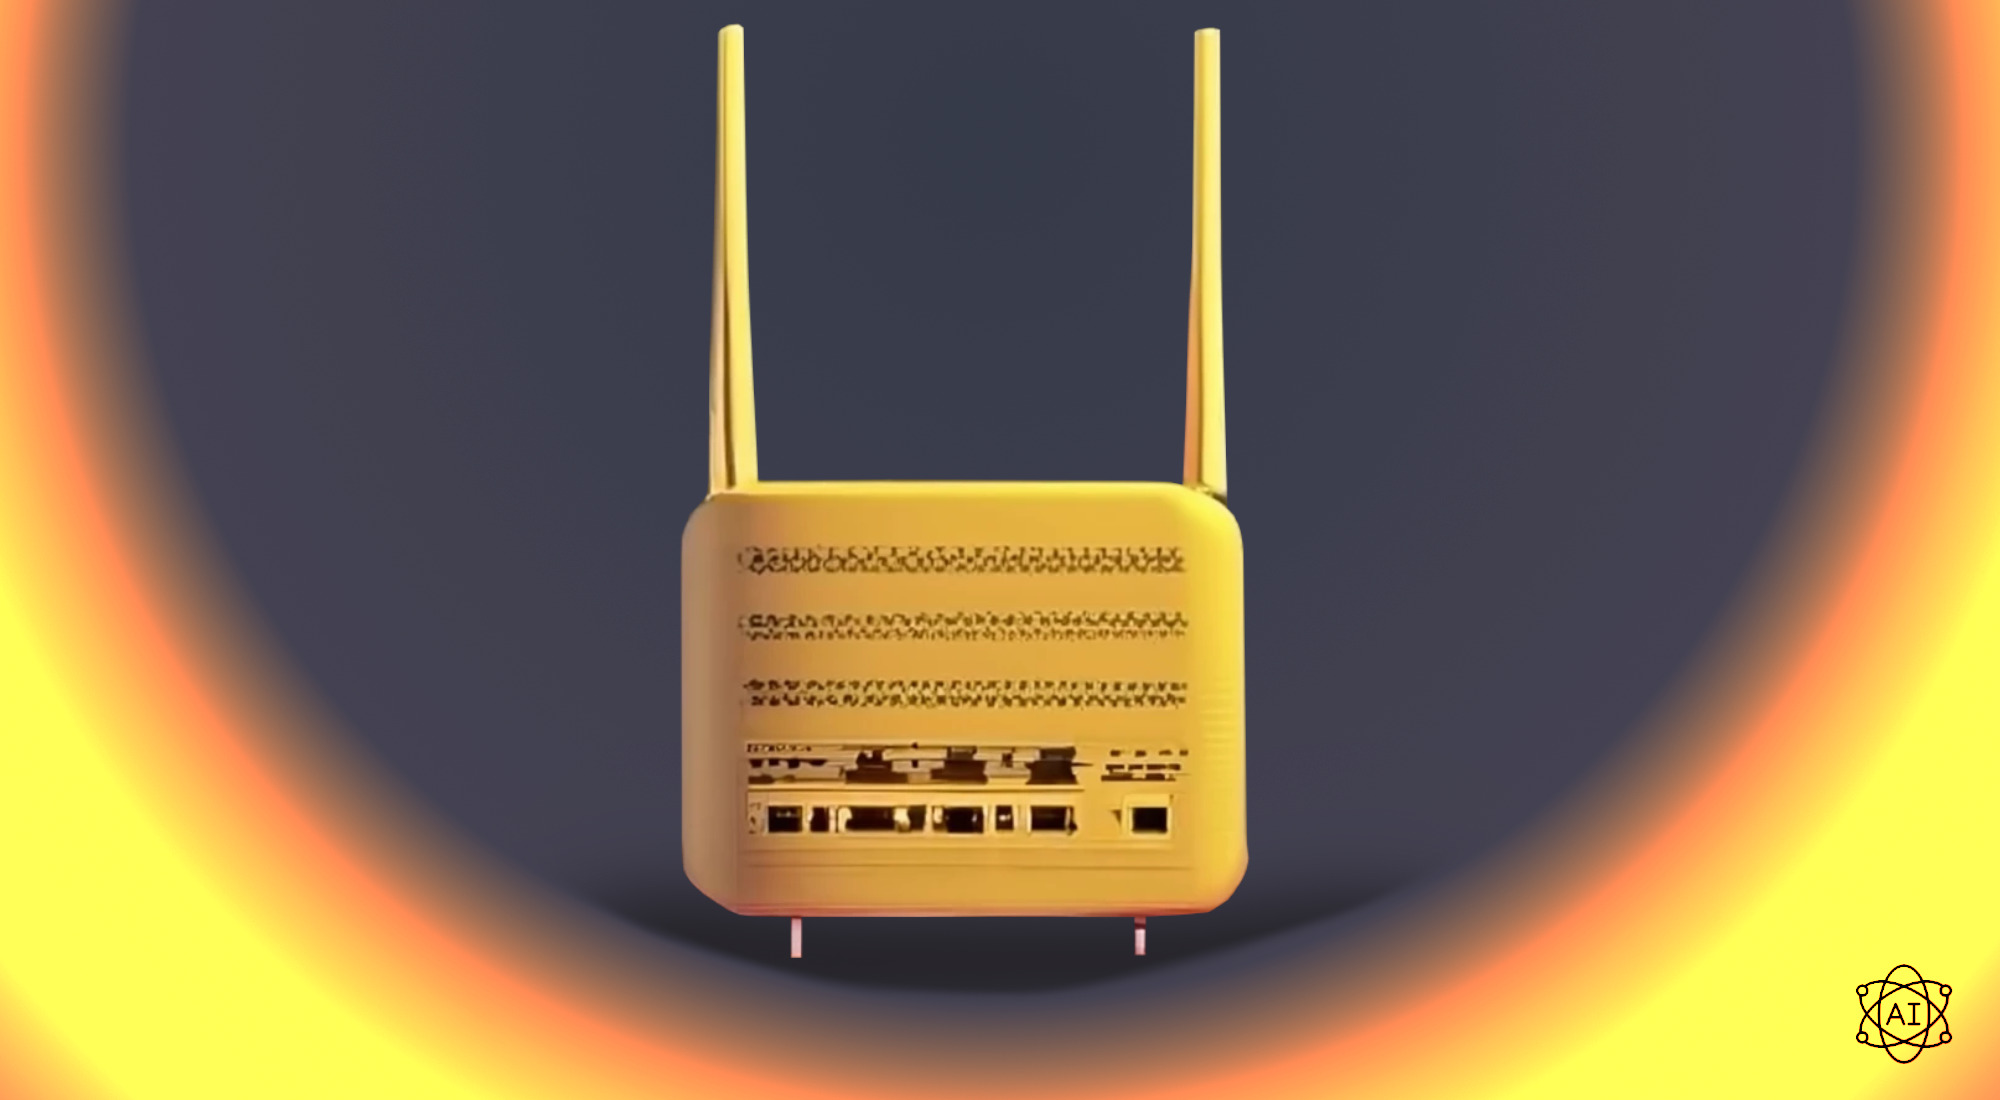 A Guide to Choosing the Best Router for Your Home: Modem Routers vs Routers vs Mesh Routers